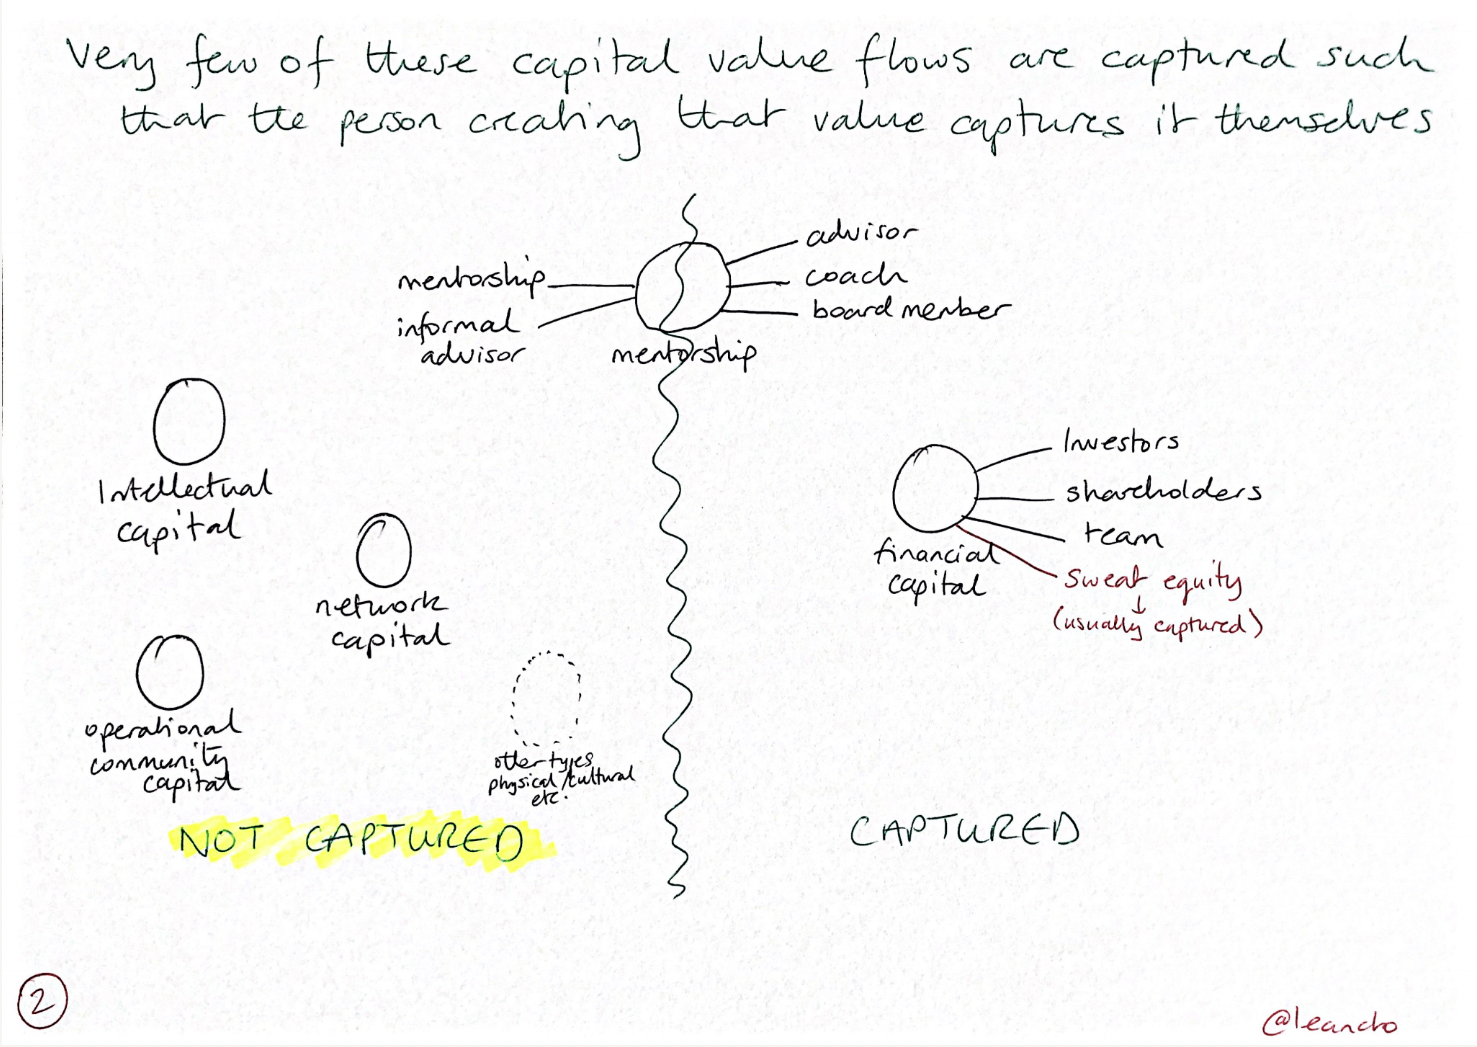 How can we redefine value capture back into the community in a positive-sum way?